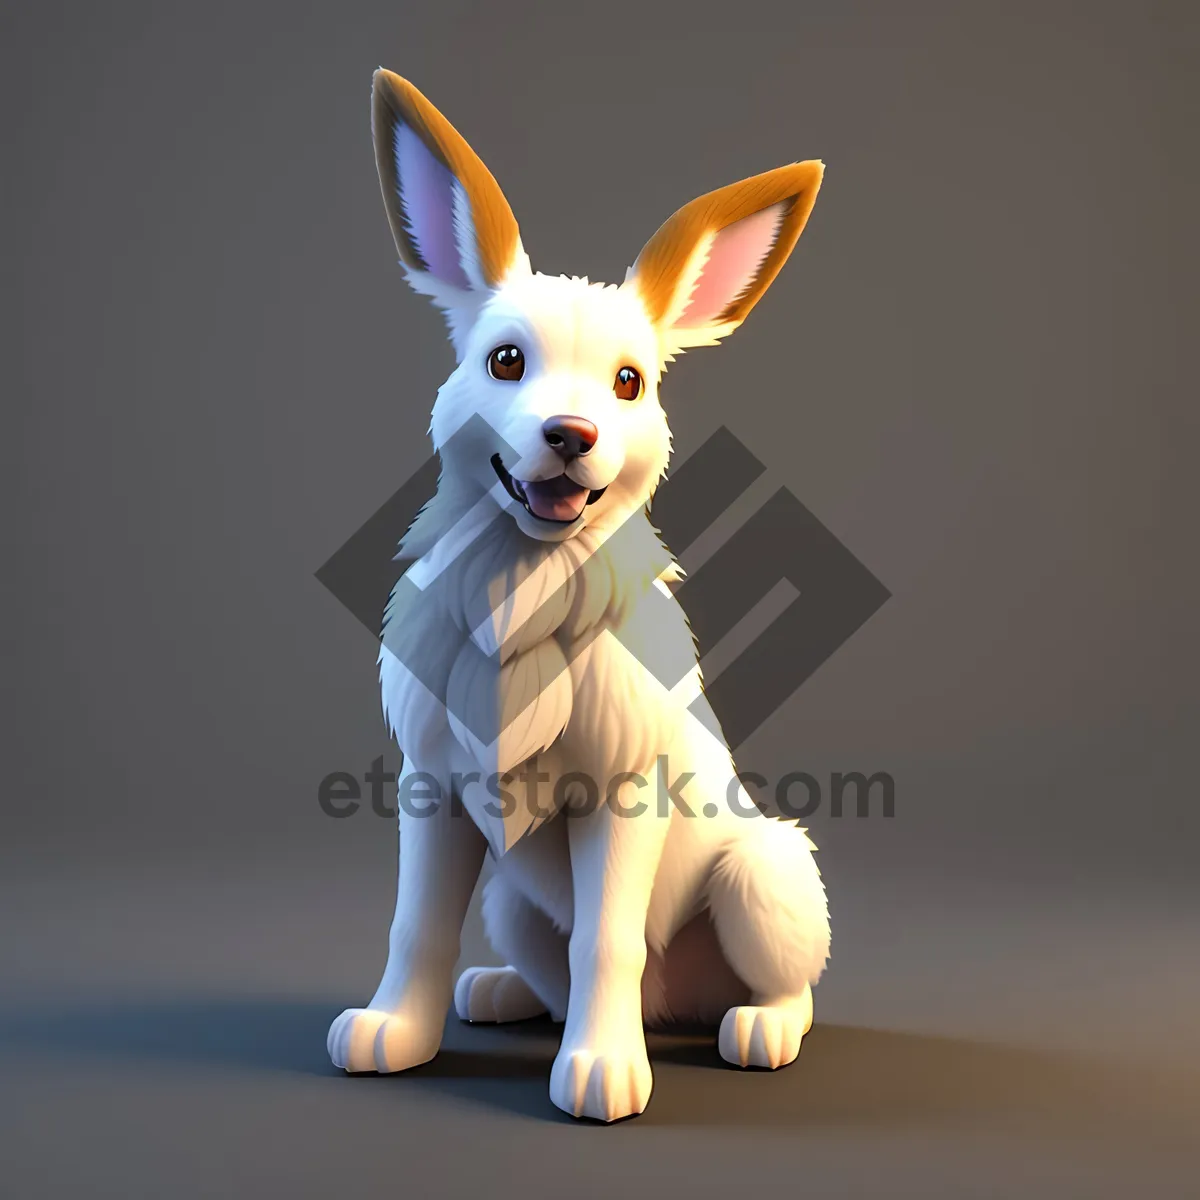 Picture of Cute 3D Bunny Baby Cartoon Animal Render